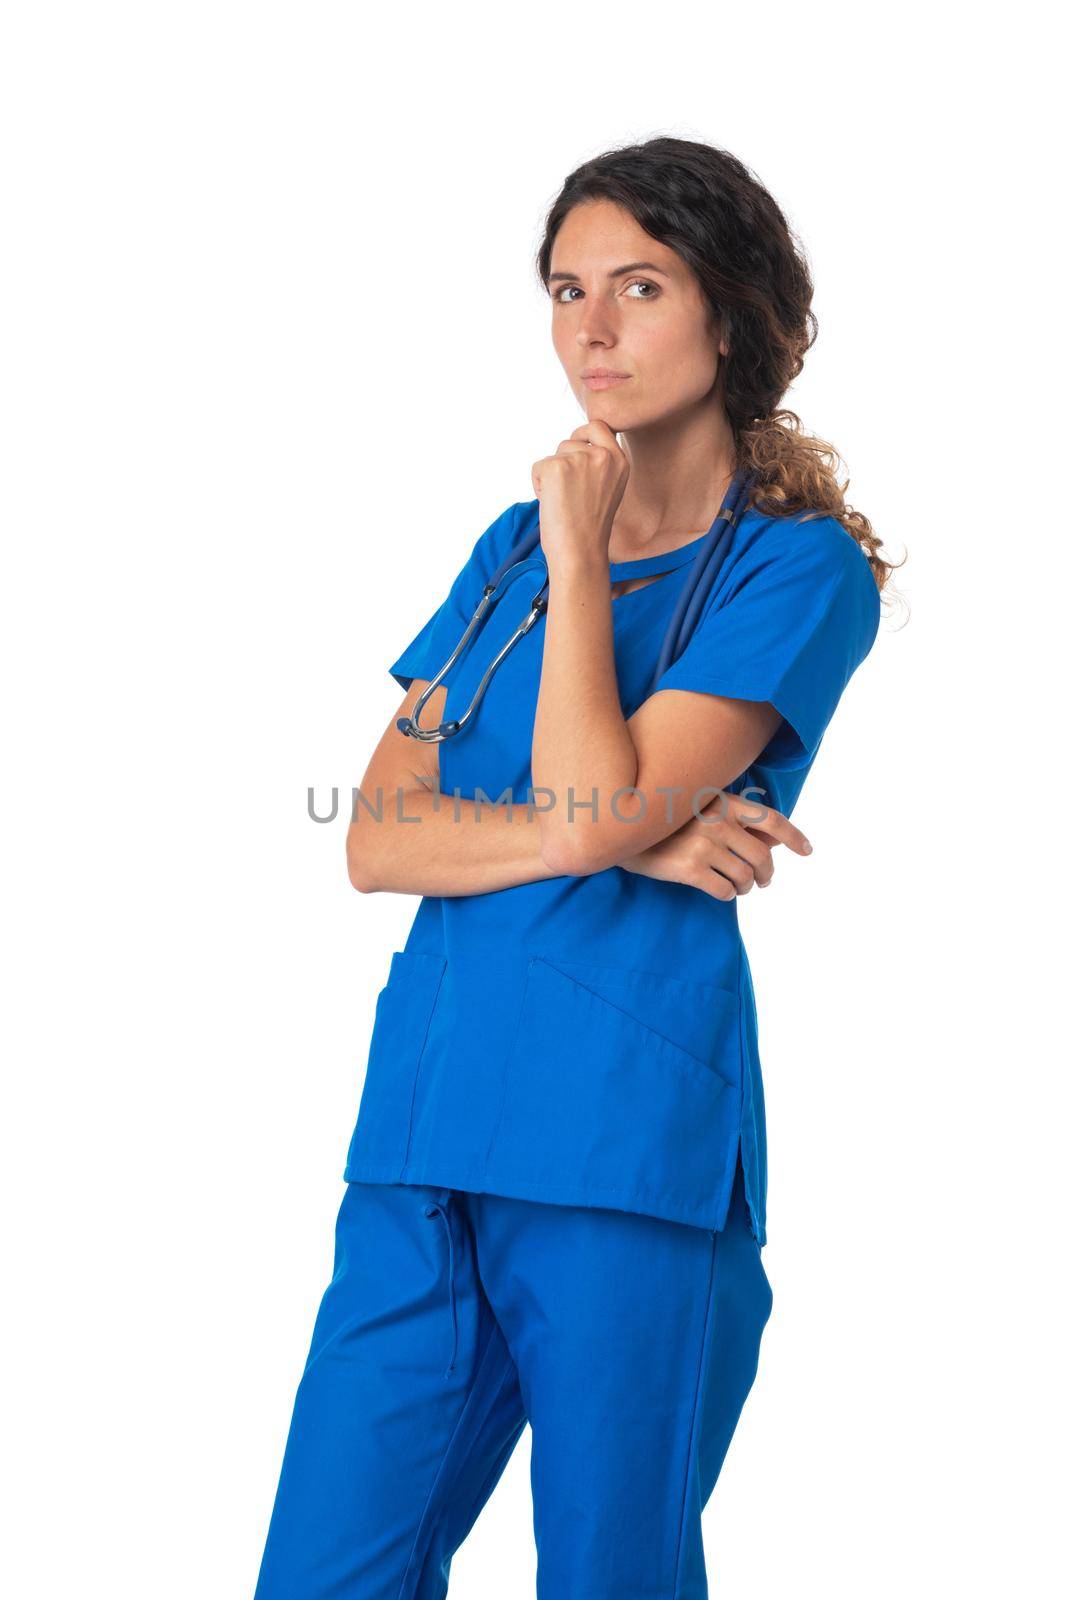 Young doctor surgeon woman over isolated white background with hand on chin thinking about question, pensive expression. Doubt concept.